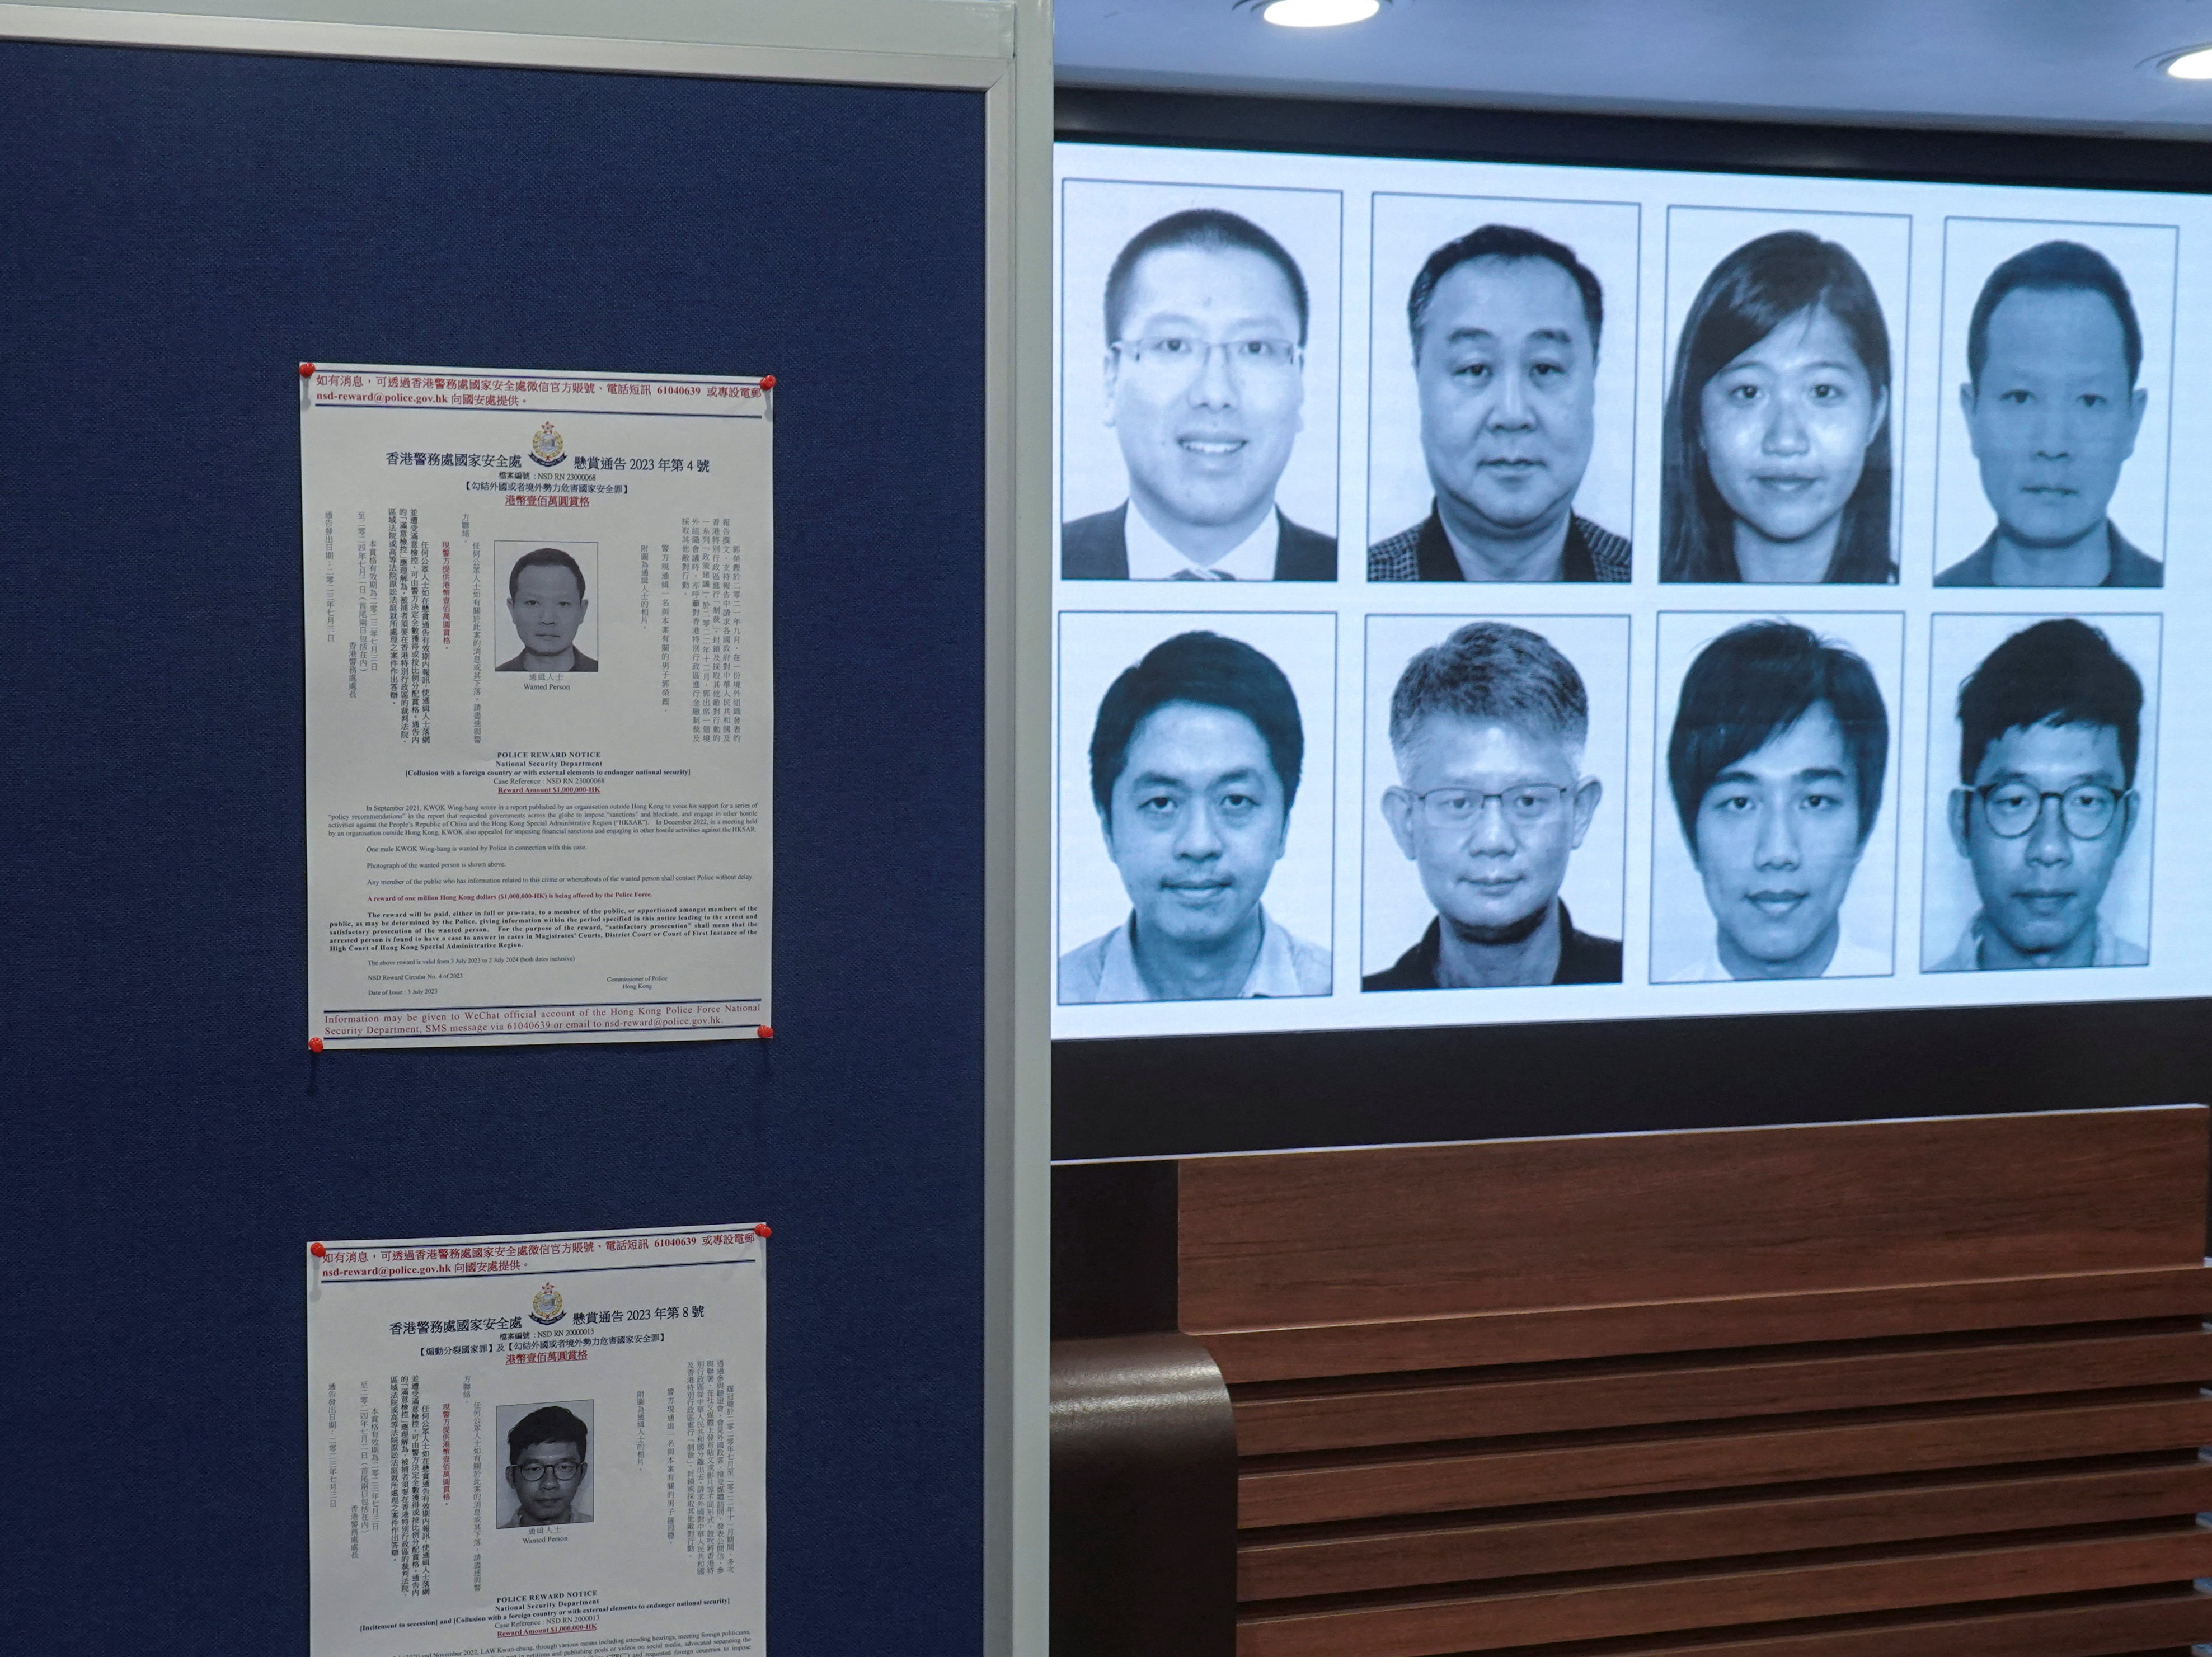 Photos of eight activists for whom arrest warrants have been issued for national security offences are displayed during a press conference in Hong Kong